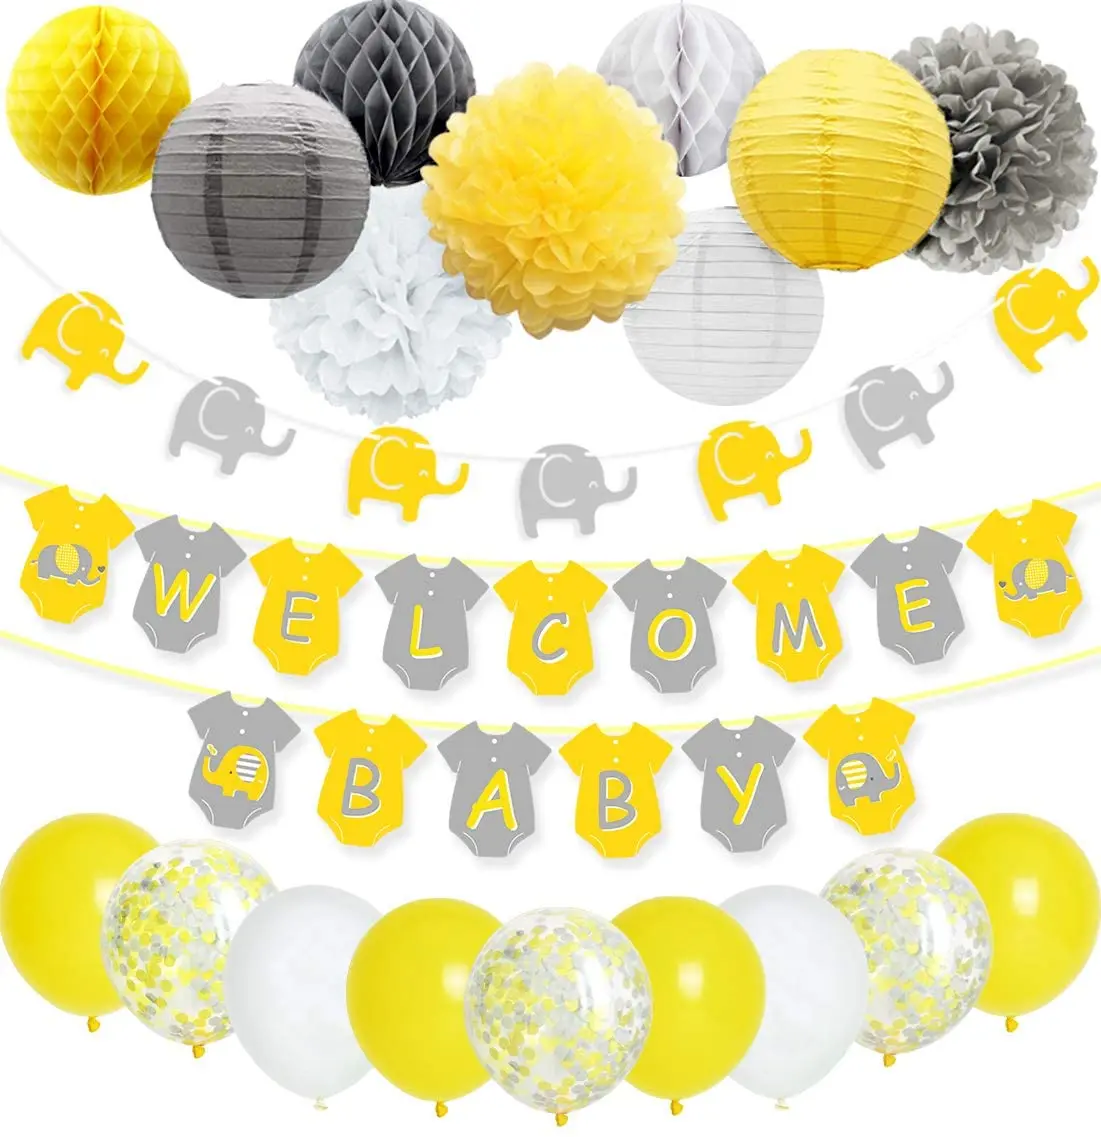 JOYMEMO Yellow Grey Elephant Baby Shower Decorations for Boy or Girl, Welcome Baby Banner Elephant Garland Confetti Balloons